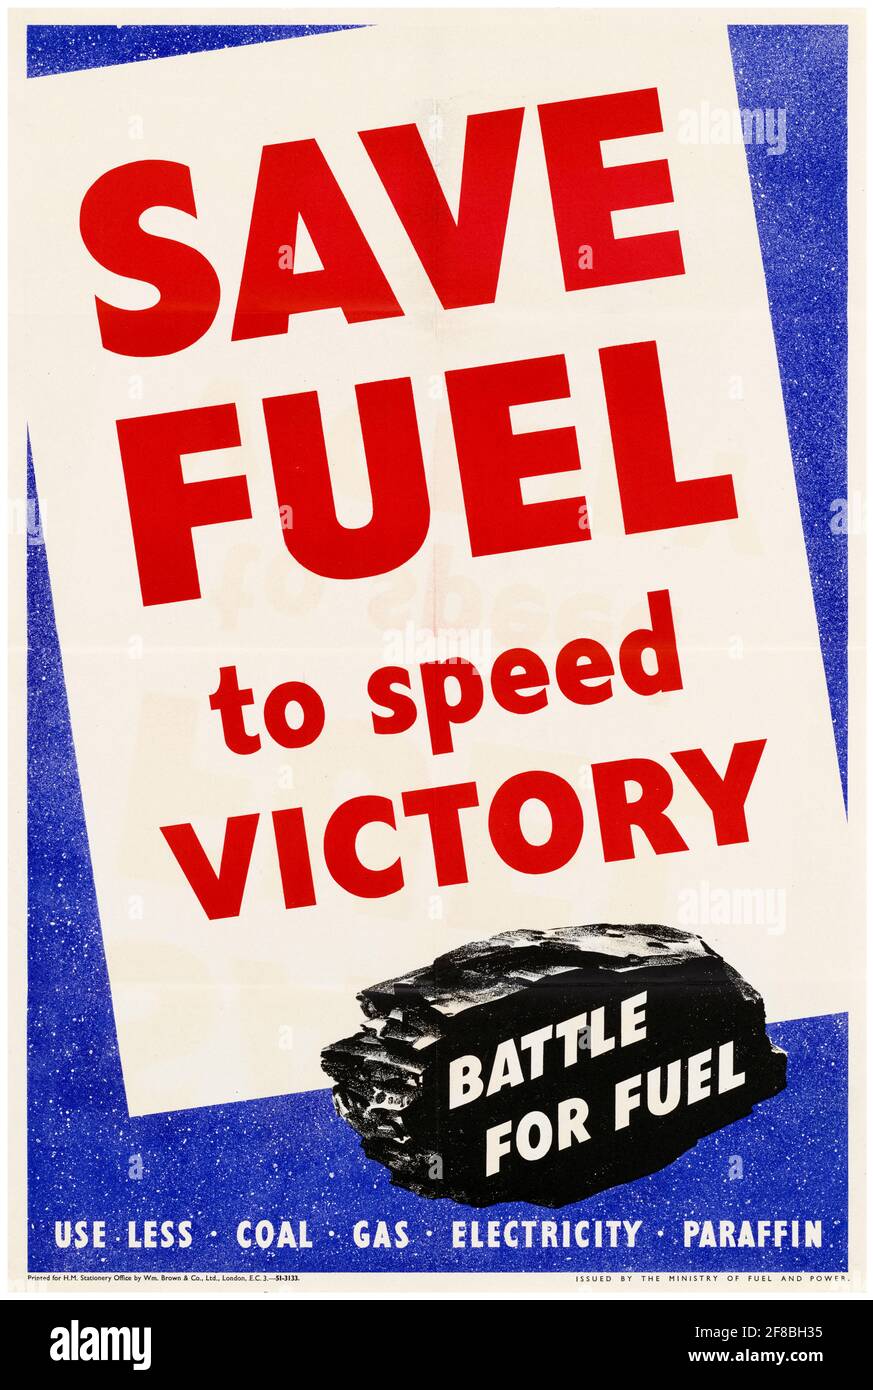 Save Fuel to Speed Victory, British WW2 Saving fuel poster,  1942-1945 Stock Photo